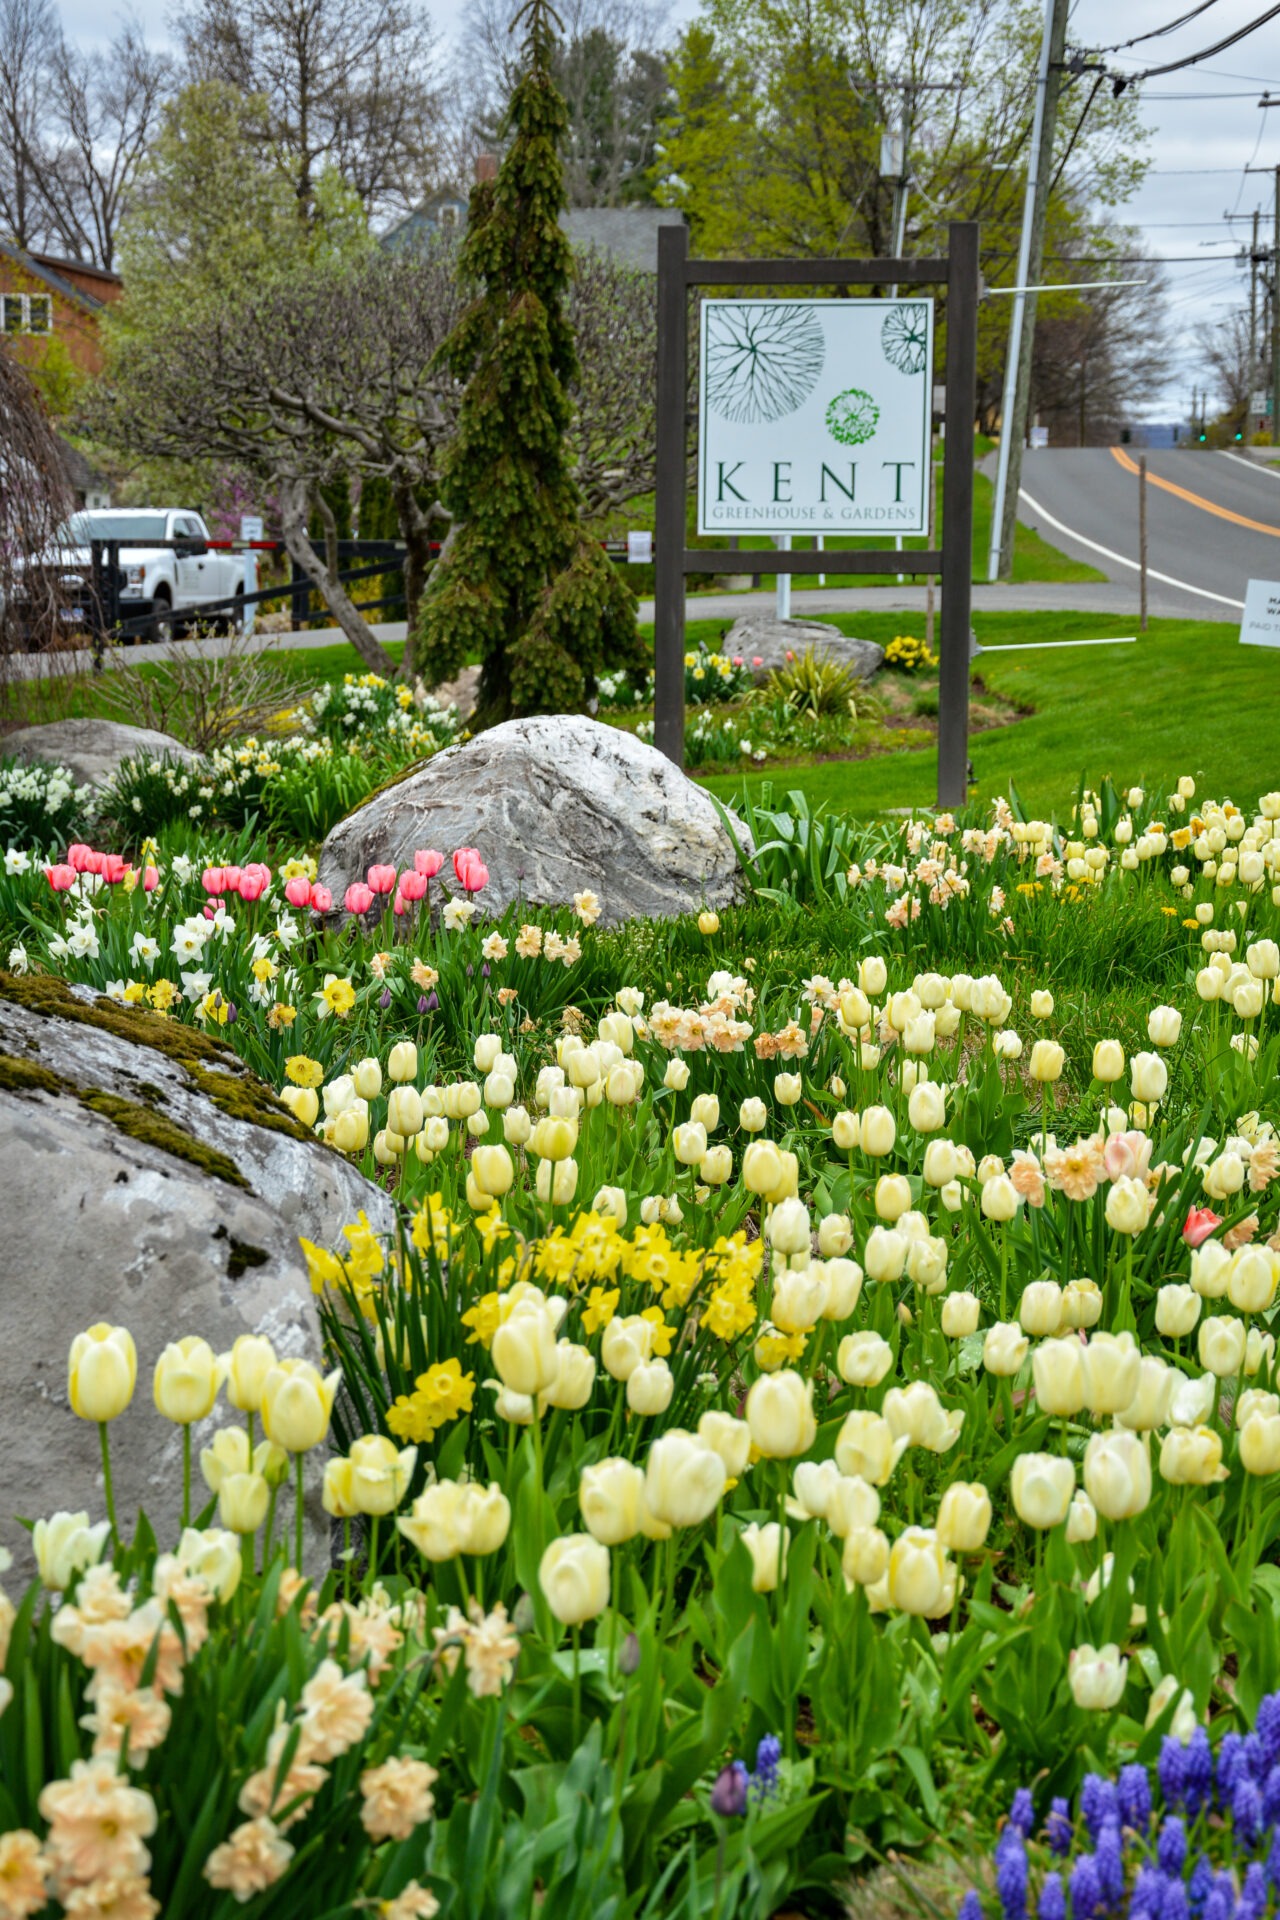 A vibrant garden bursting with yellow and pink tulips and daffodils beneath a sign reading "KENT Greenhouse & Gardens," with a suburban street backdrop.